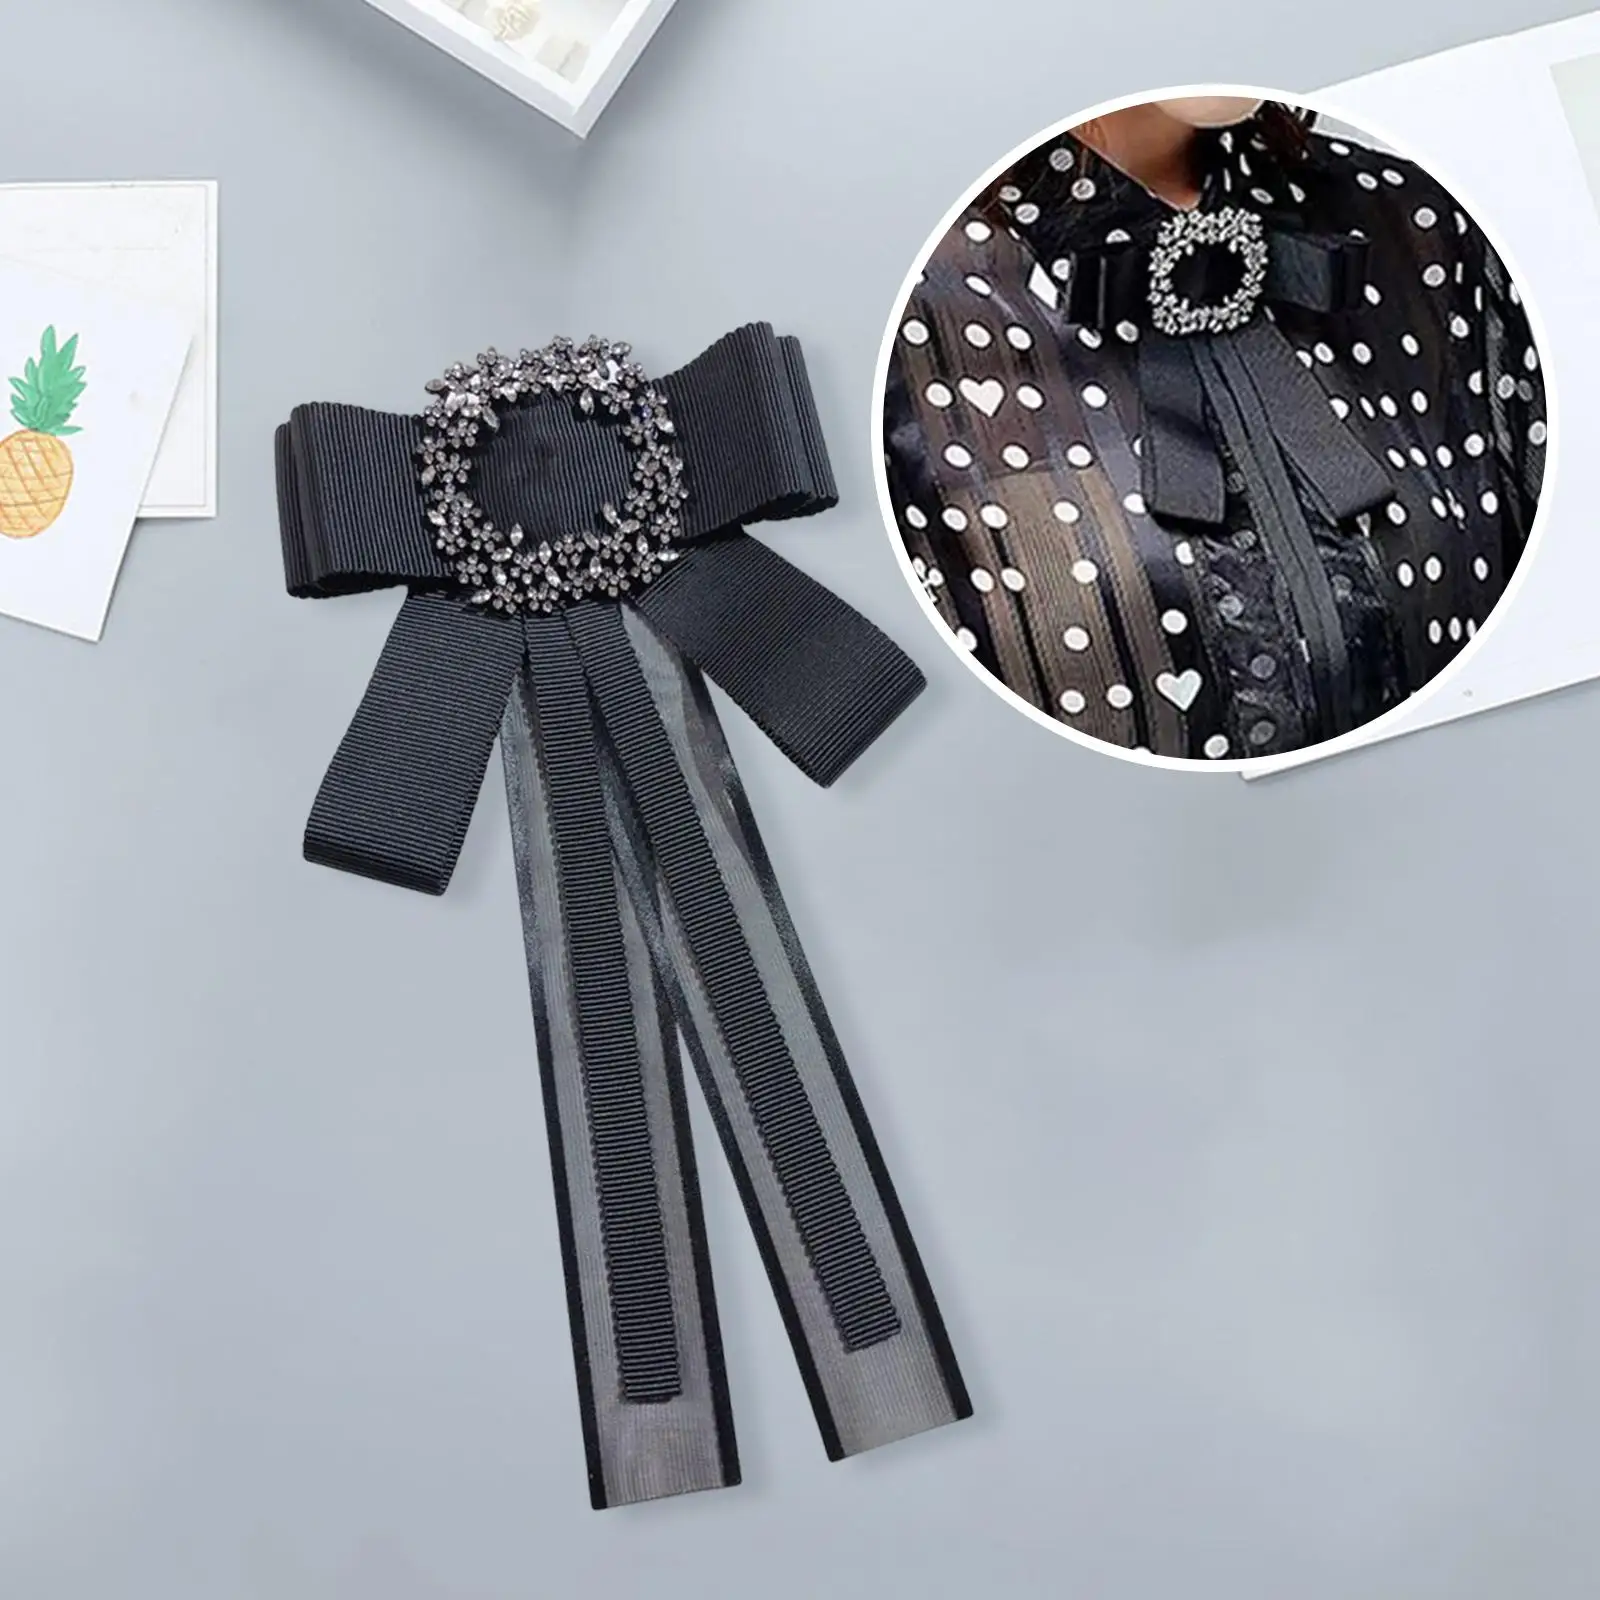 Retro Style Bow Tie Lady Clothing Accessories Bowknot Lapel Pin Solid Color Black Necktie for Dress Wedding Graduation Vest Work